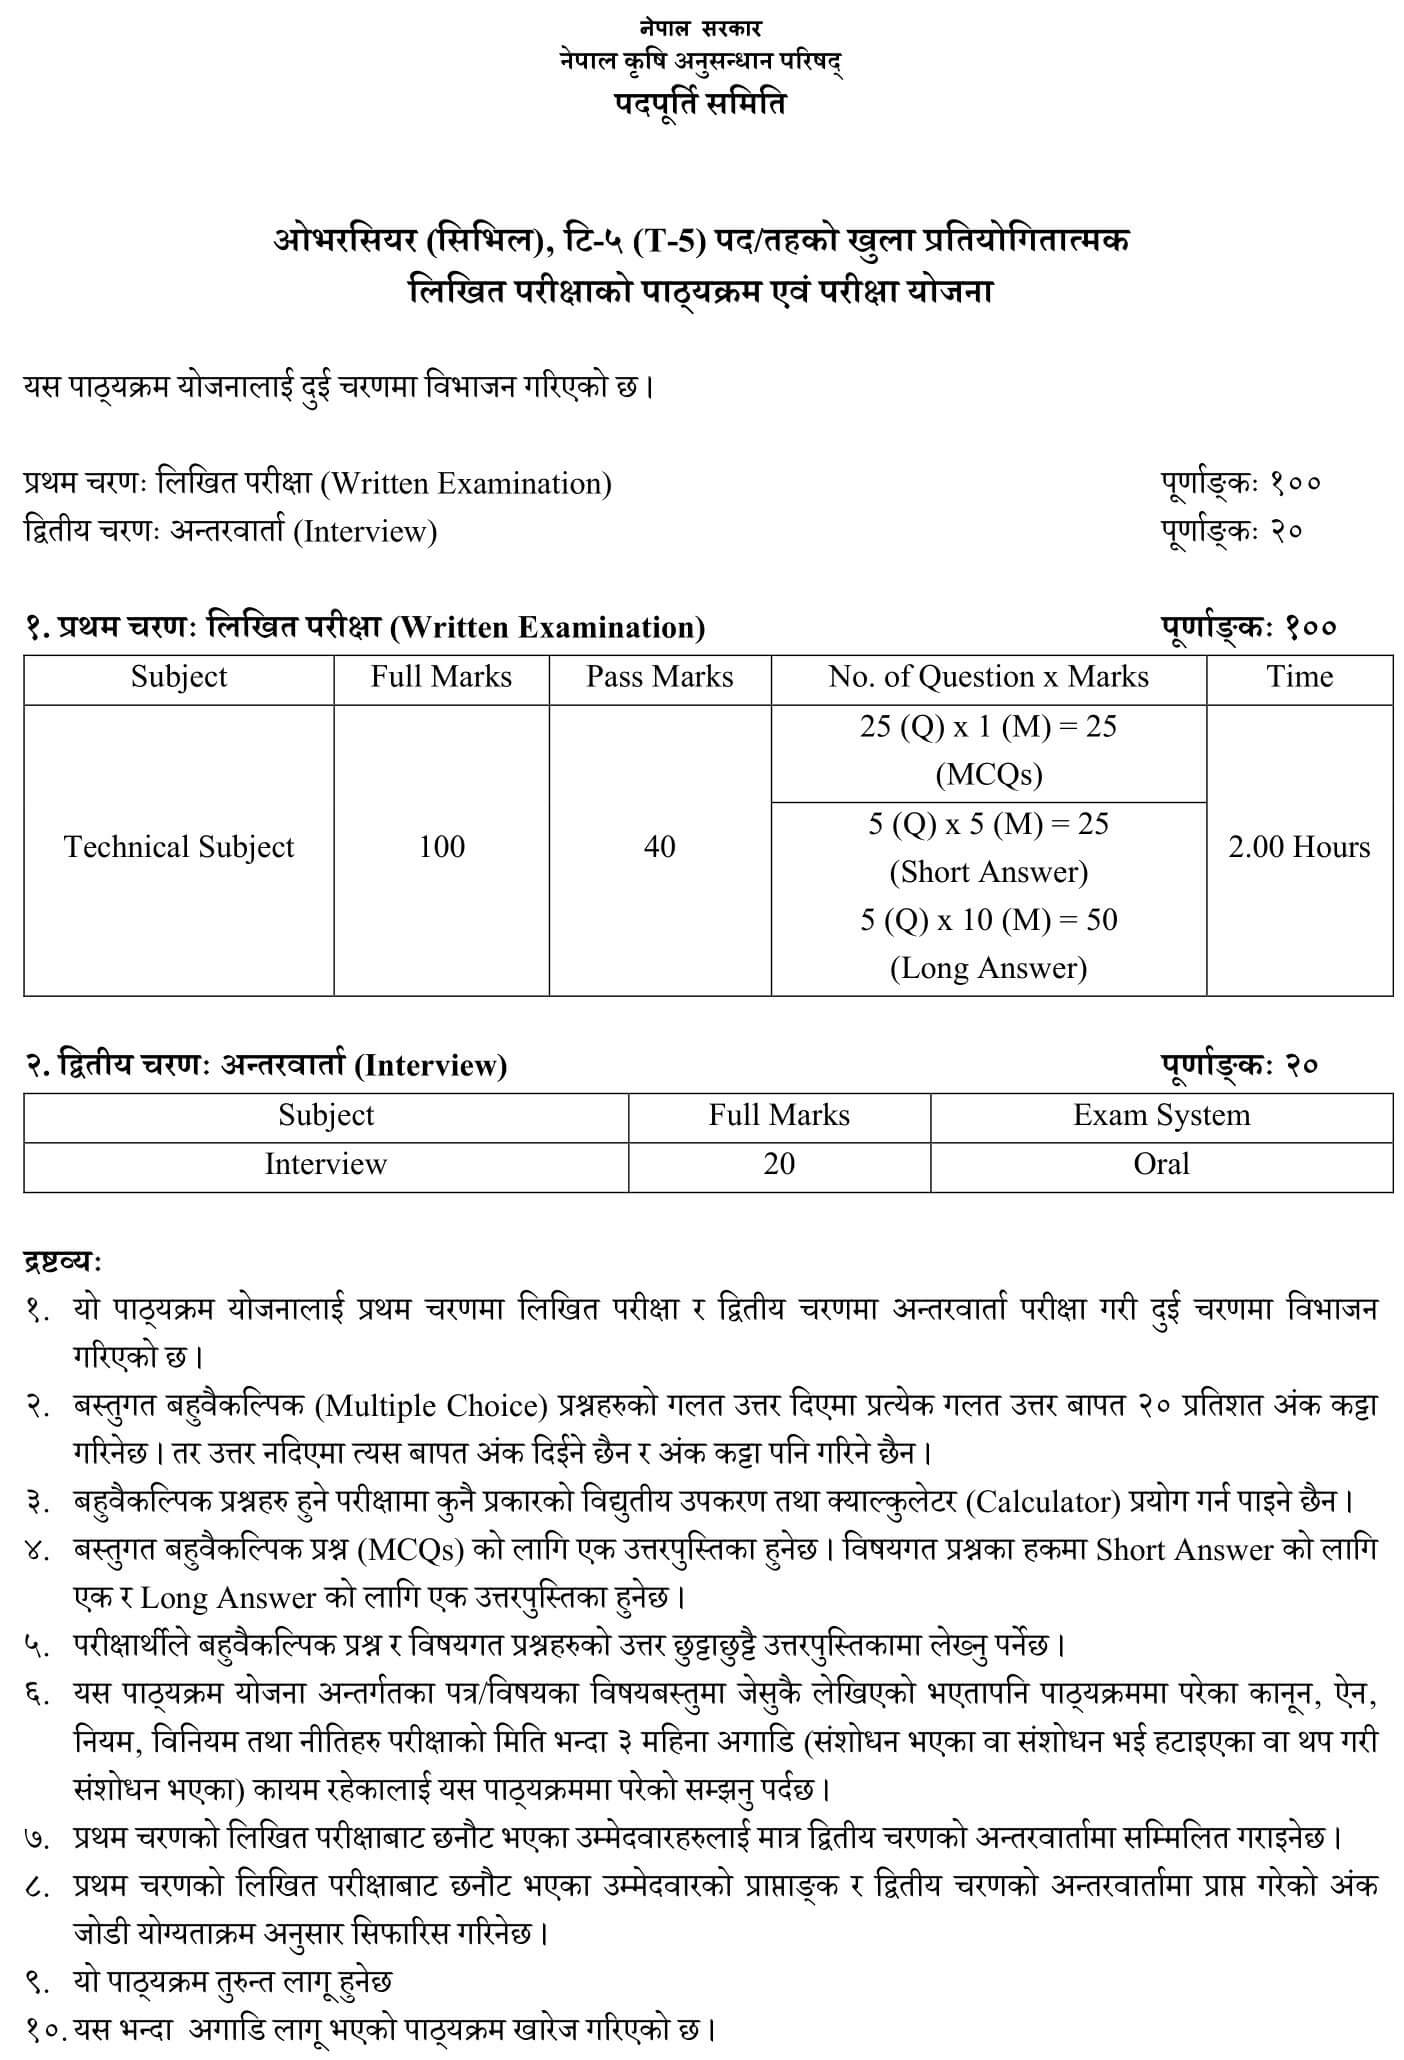 Nepal Agricultural Research Council Level 5 Civil Overseer Syllabus. NARC Level 5 Civil Overseer Syllabus. NARC Syllabus PDF